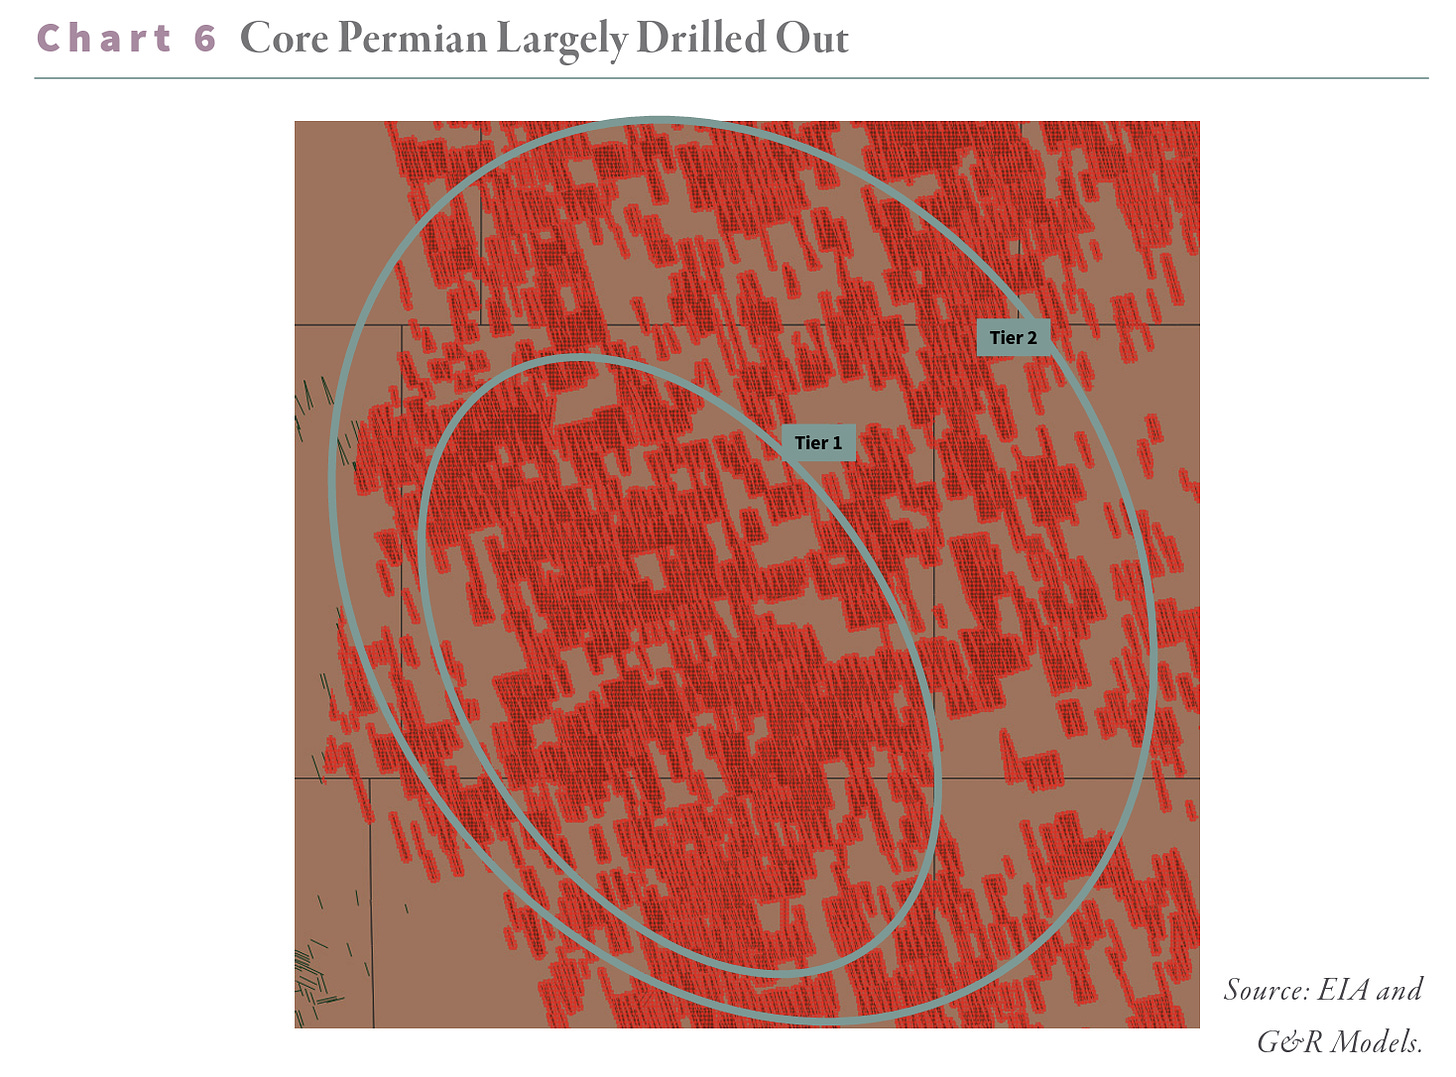 Graphic showing severe depletion of Tier 1 andTier 2 Permian oil fields.